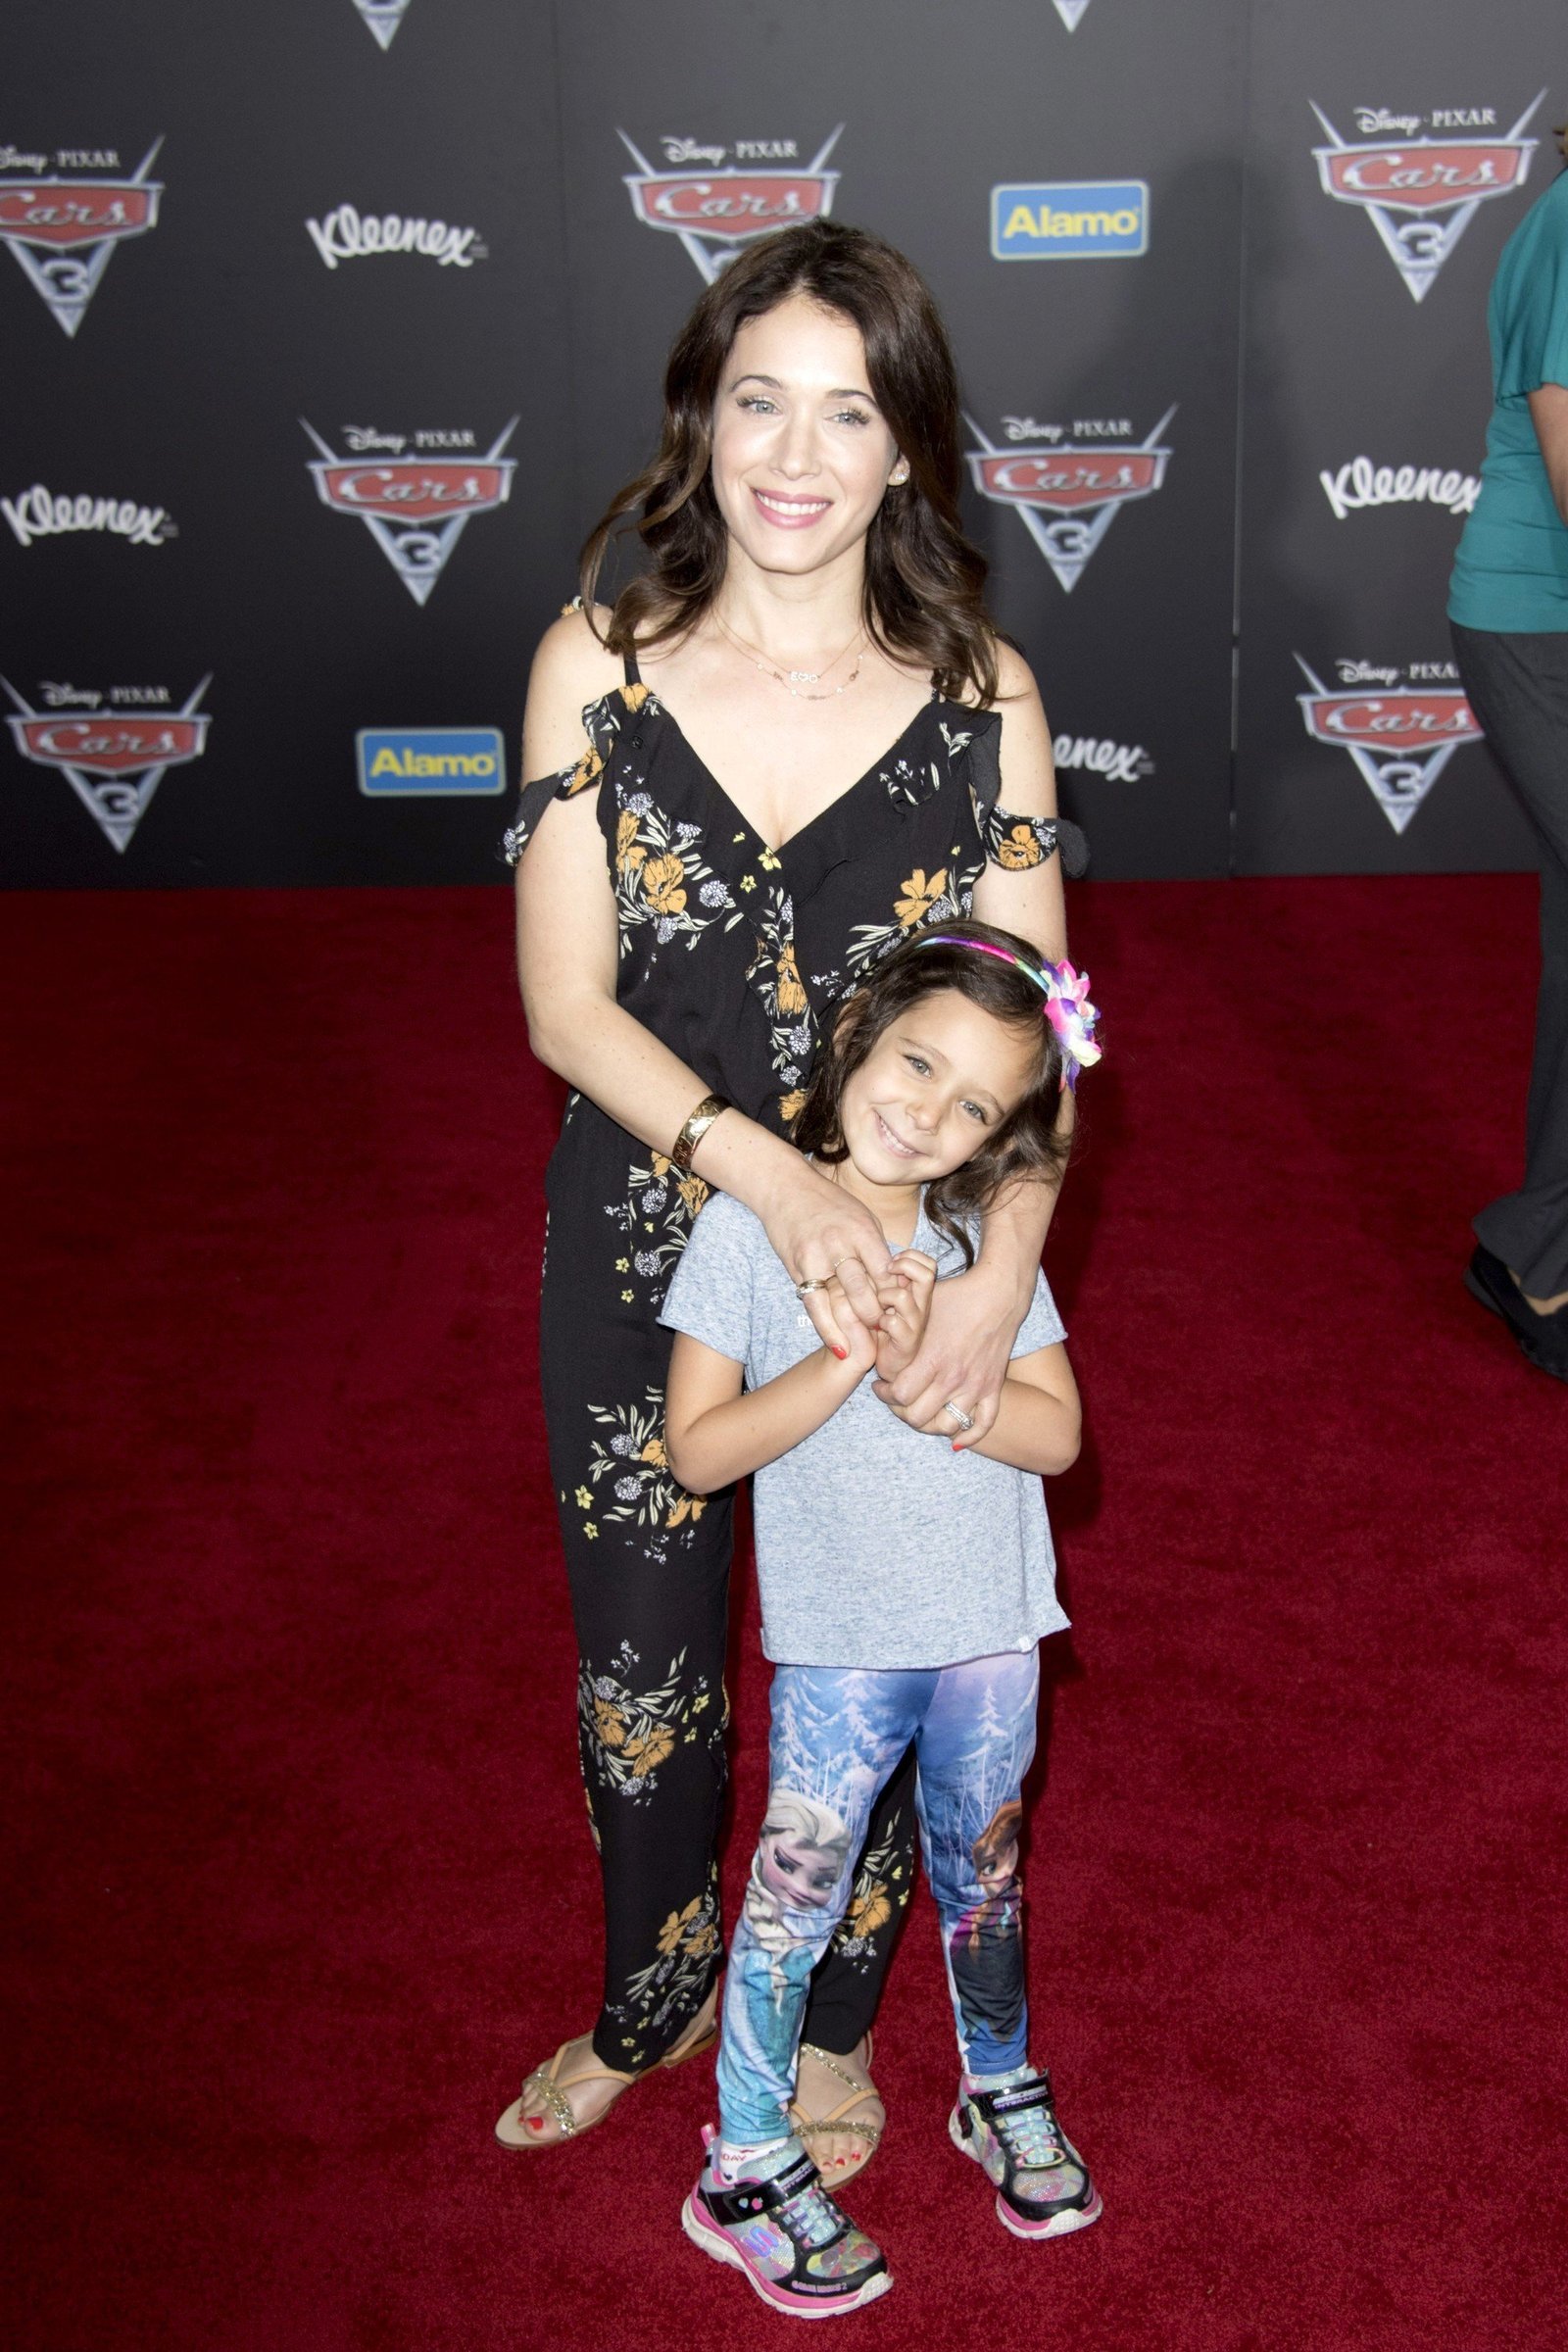 Marla Sokoloff - World Premiere of 'Cars 3' at Anaheim Convention Center | Picture 1505821